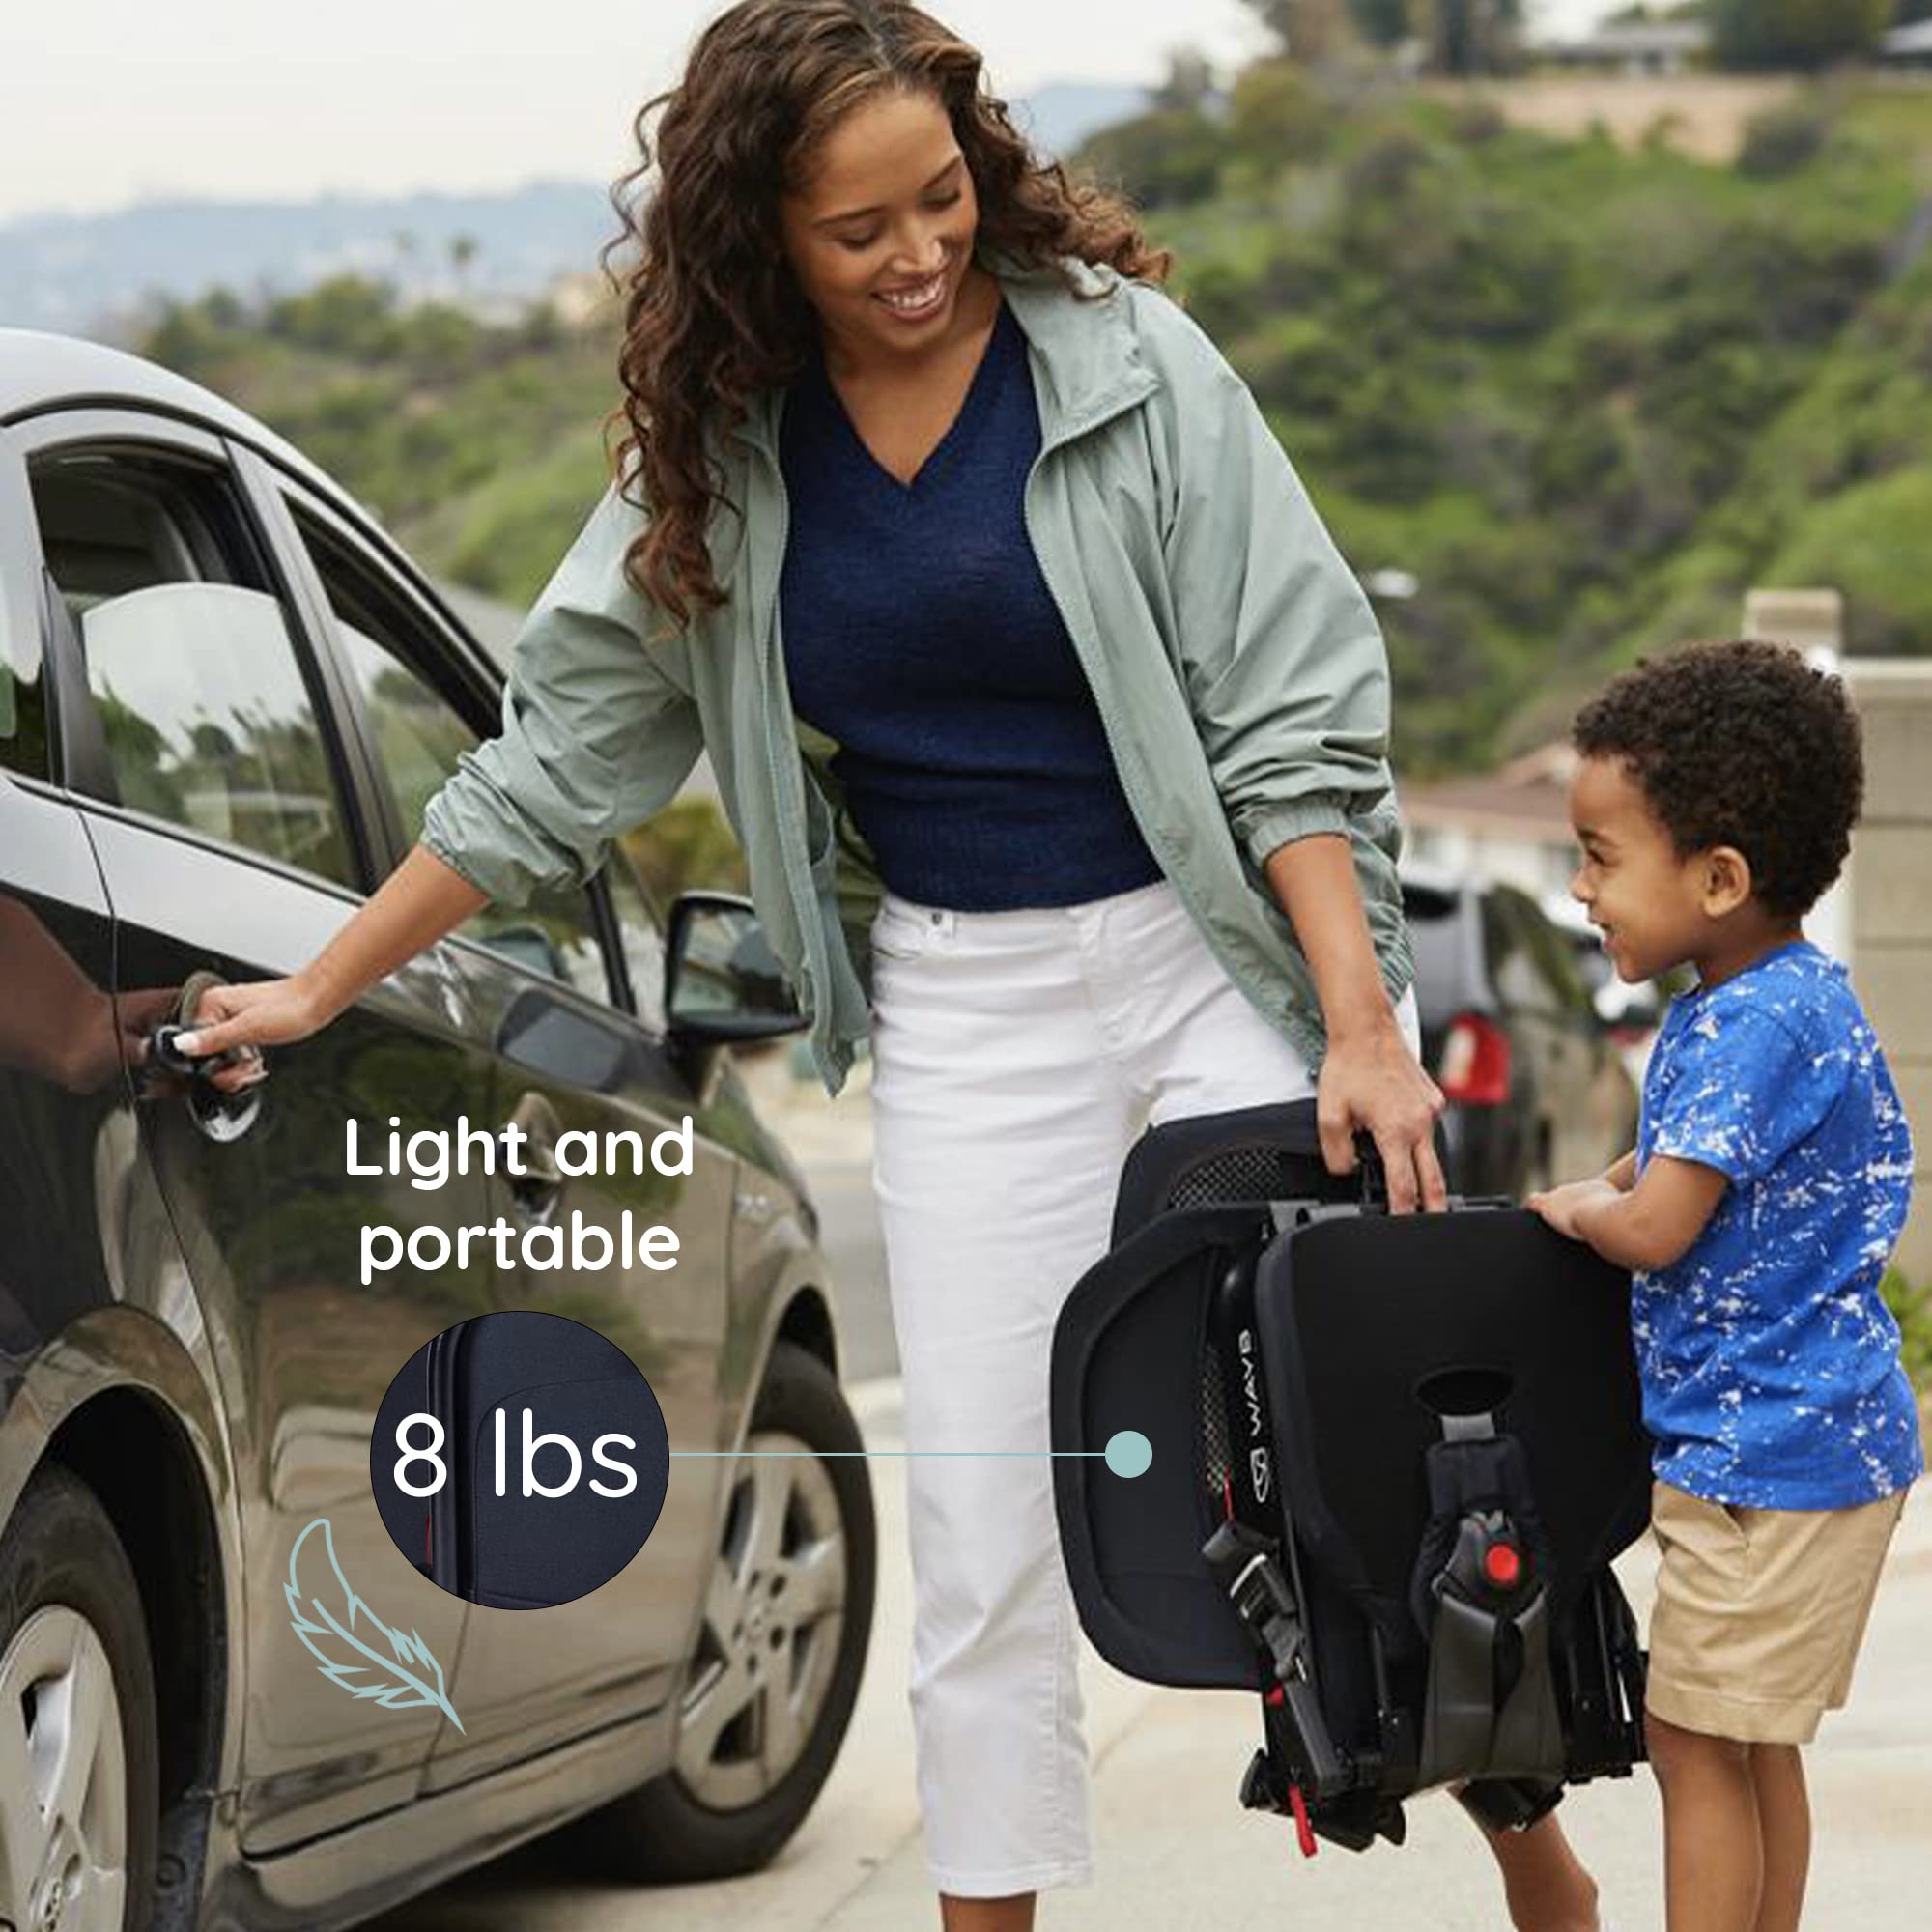 WAYB Pico Travel Car Seat with Standard Carrying Bag - Lightweight, Portable, Foldable - Perfect for Airplanes, Rideshares, and Road Trips - Forward Facing for Kids 22-50 lbs. and 30-45”